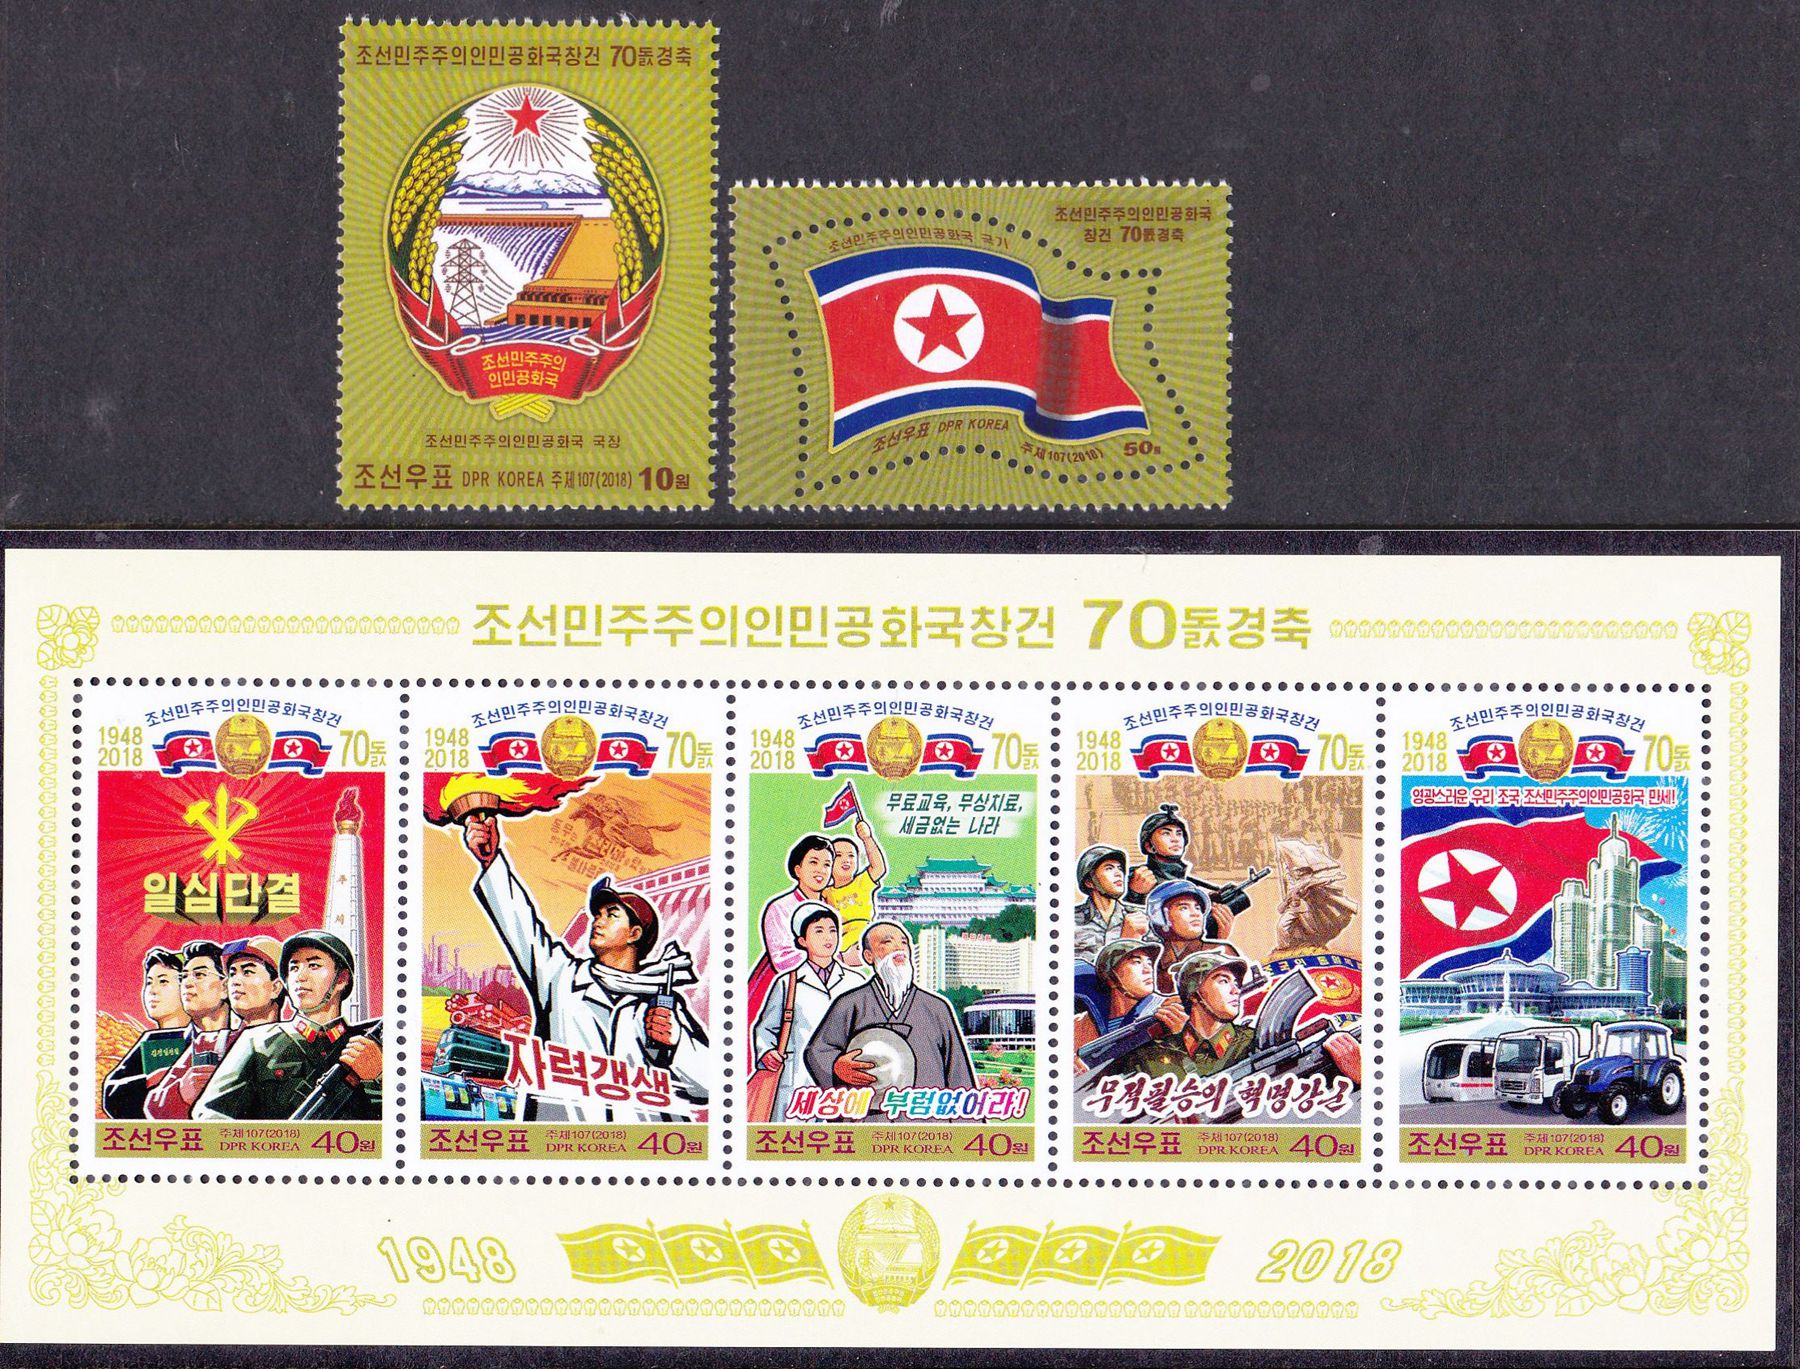 L4669, Korea "70th Anniv. Founding of Korea", 2 Pcs Stamps and SS, 2018